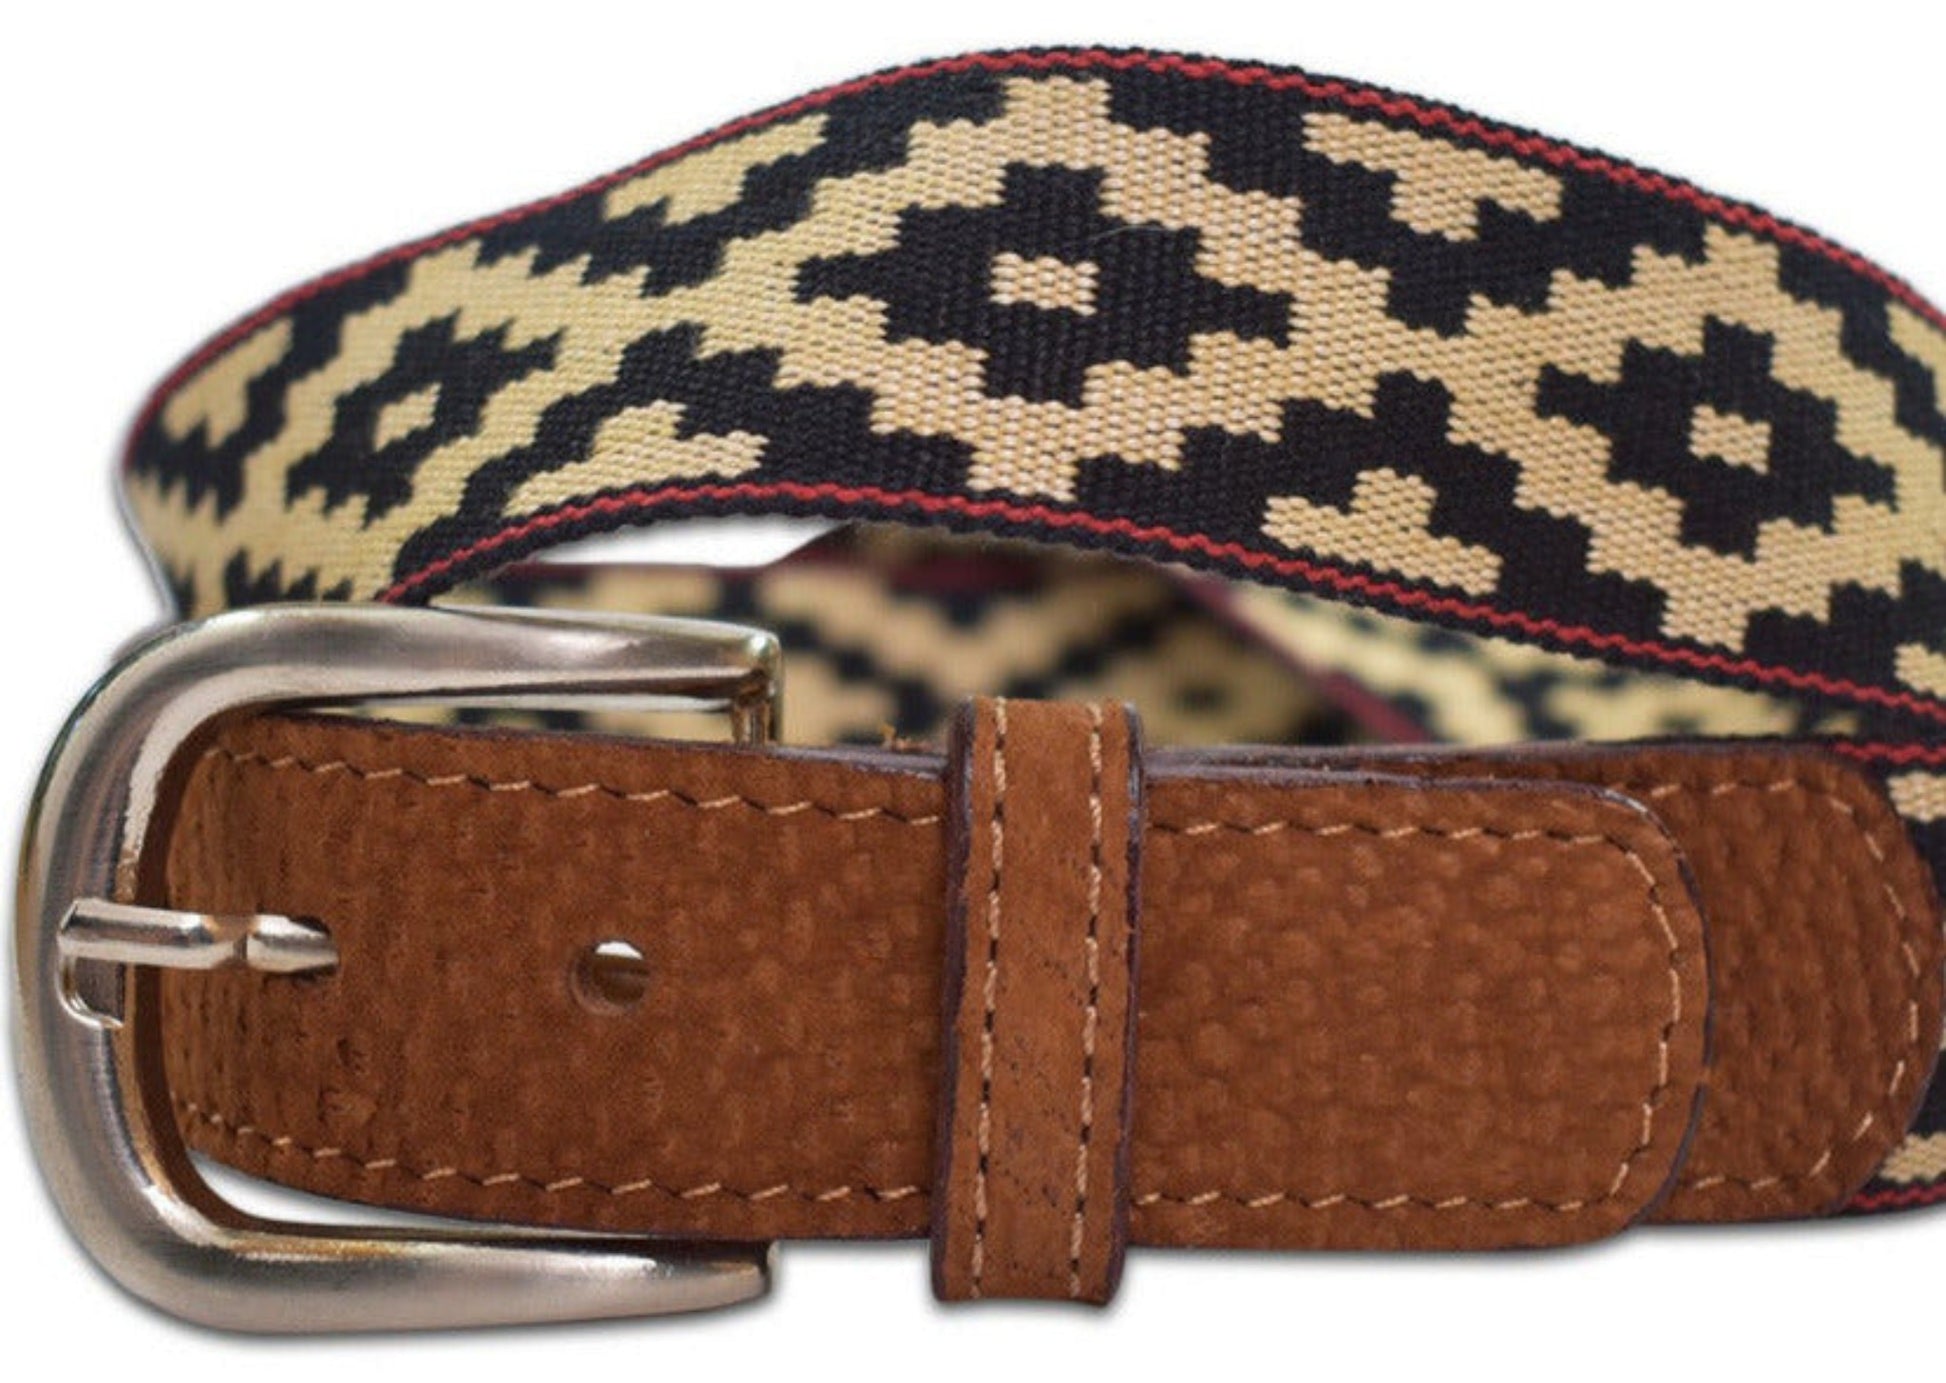 woven cloth matera design  belt with suede leather trim 